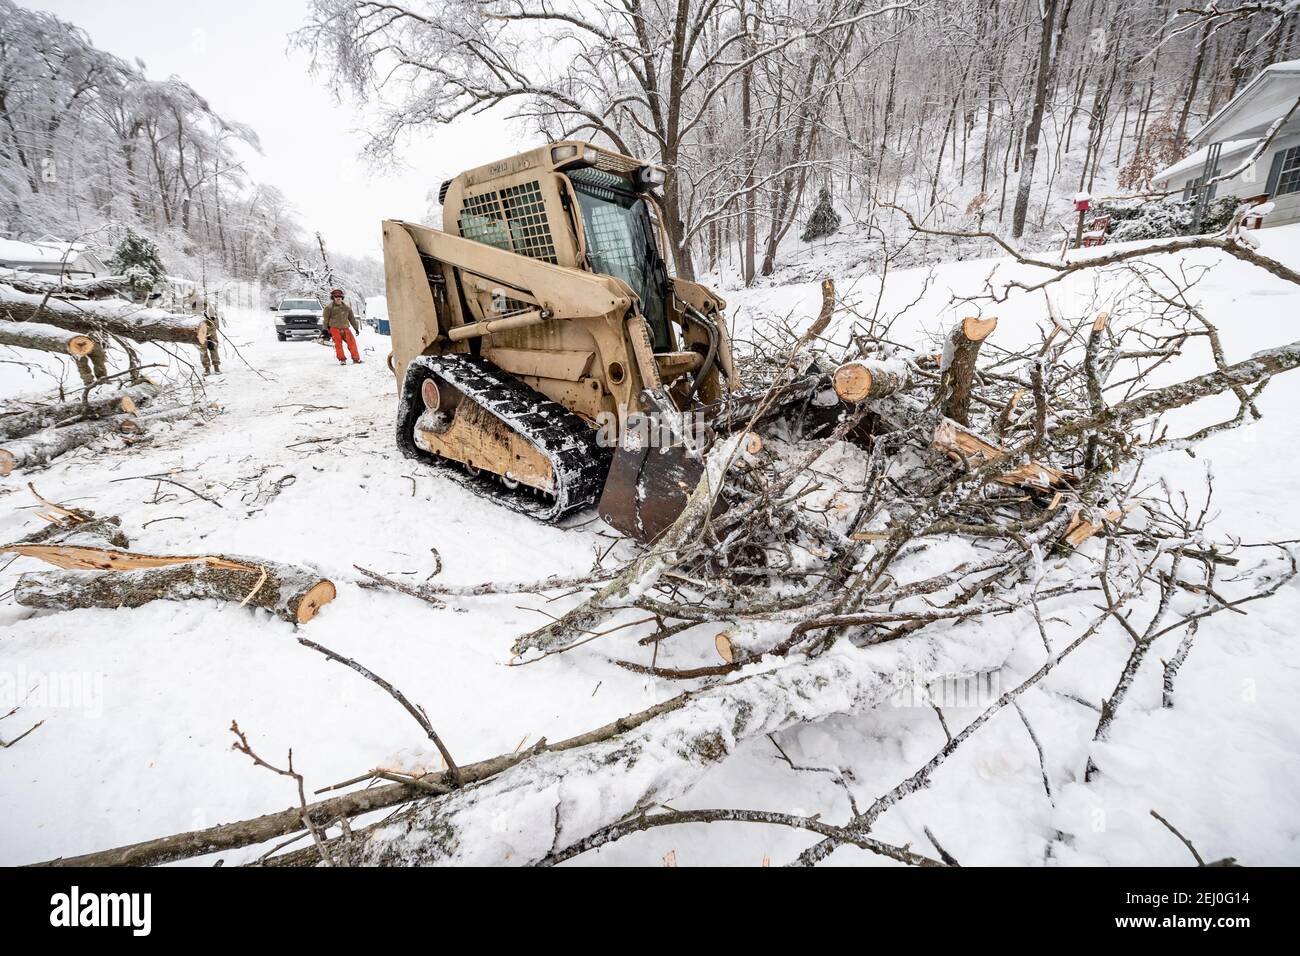 Ceredo, United States. 19th Feb, 2021. U.S. soldiers with the West Virginia National Guard clear debris from a winter storm off a road February 19, 2021 in Ceredo, Wayne County, West Virginia. A large winter storm system earlier in the week left more than 90,000 West Virginians without electric throughout the region, felling trees and making remote roads impassable. Credit: Planetpix/Alamy Live News Stock Photo